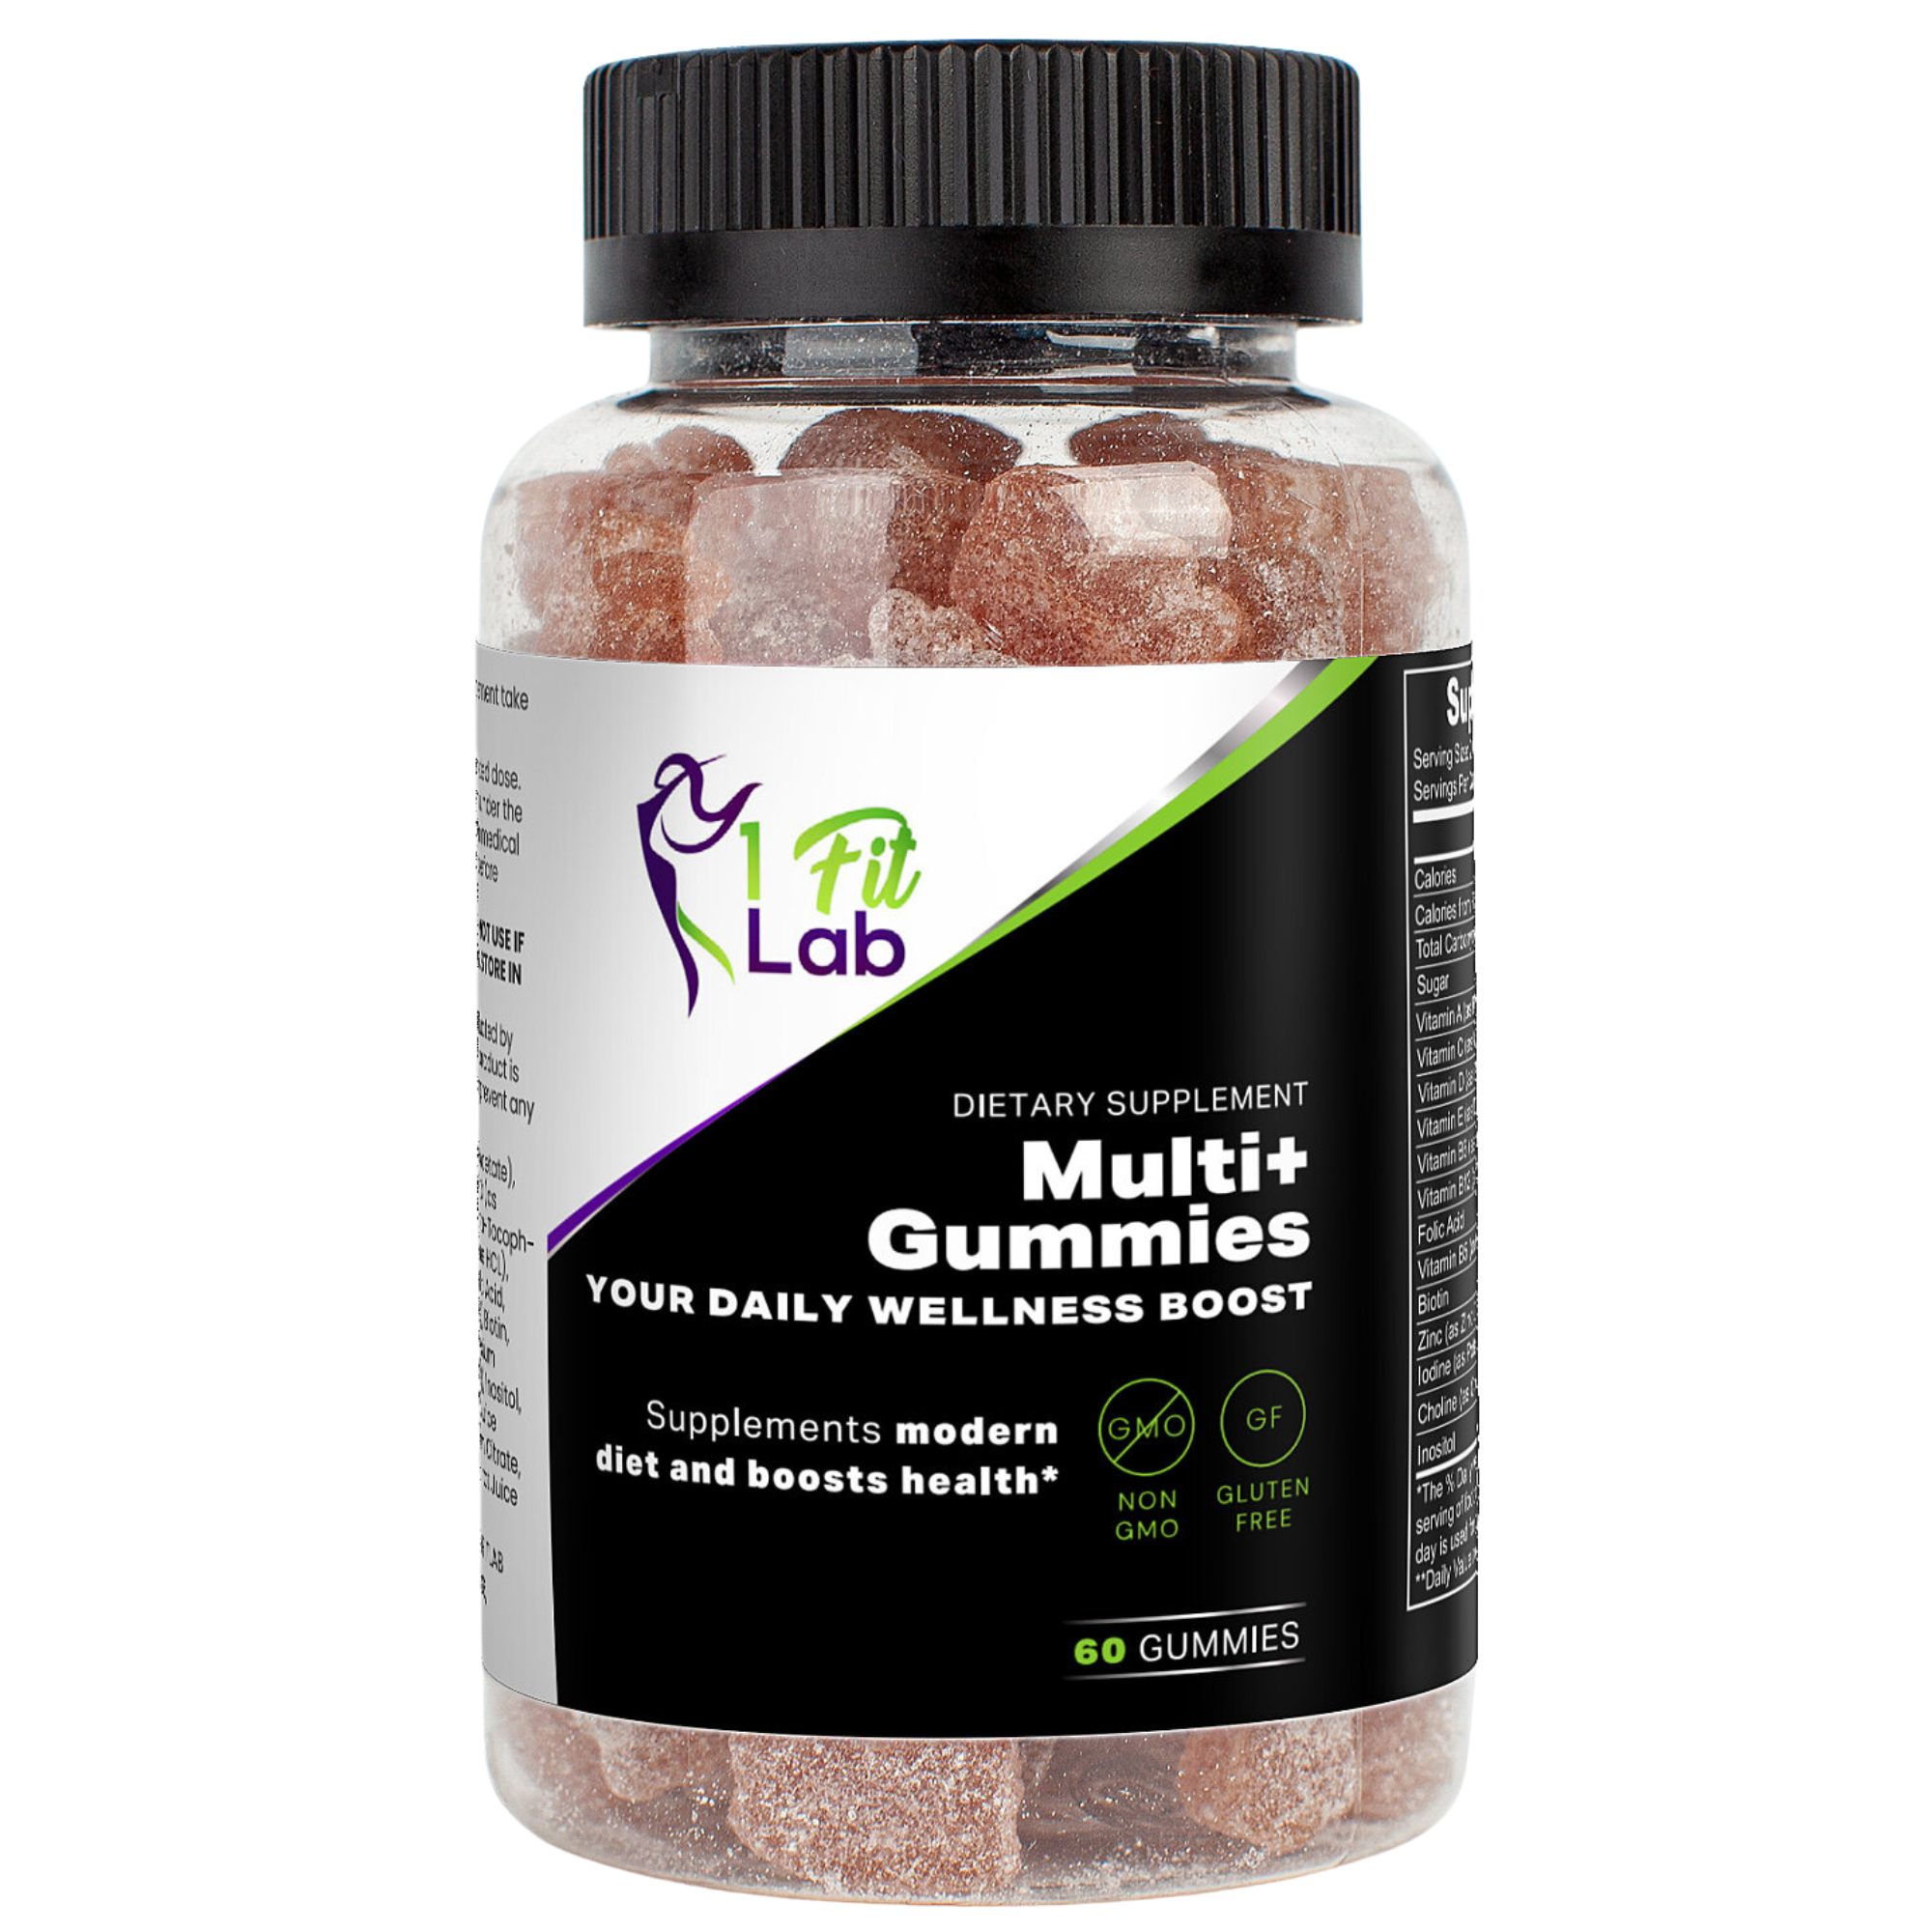 Bottle of Multi+ Multivitamin Gummies for daily health support